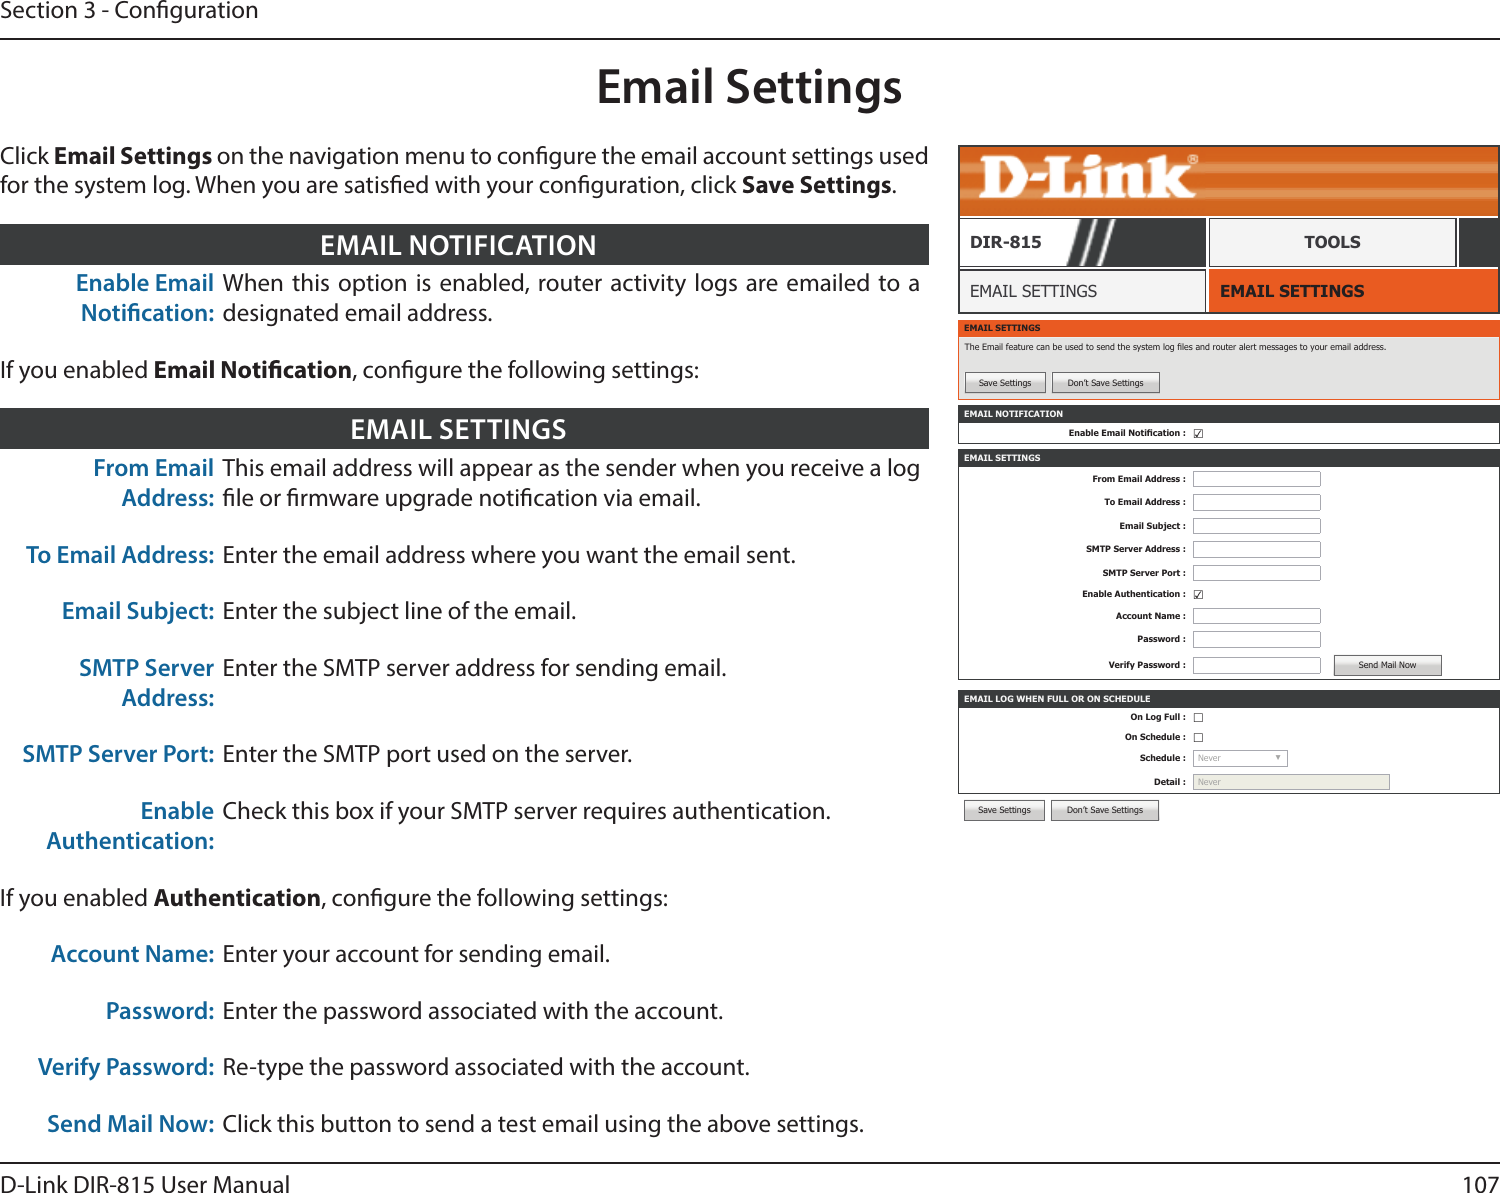 107D-Link DIR-815 User ManualSection 3 - CongurationEmail SettingsEMAIL SETTINGSEMAIL SETTINGSDIR-815 TOOLSClick Email Settings on the navigation menu to congure the email account settings used for the system log. When you are satised with your conguration, click Save Settings.Enable Email Notication:When this option is enabled, router activity logs are emailed to a designated email address.EMAIL NOTIFICATIONEMAIL SETTINGSThe Email feature can be used to send the system log les and router alert messages to your email address.Save Settings Don’t Save SettingsEMAIL NOTIFICATIONEnable Email Notication : ☑EMAIL SETTINGSFrom Email Address :To Email Address :Email Subject :SMTP Server Address :SMTP Server Port :Enable Authentication : ☑Account Name :Password :Verify Password : Send Mail NowEMAIL LOG WHEN FULL OR ON SCHEDULEOn Log Full : ☐On Schedule : ☐Schedule : Never  ▼Detail : NeverSave Settings Don’t Save SettingsFrom Email Address:This email address will appear as the sender when you receive a log le or rmware upgrade notication via email.To Email Address: Enter the email address where you want the email sent.Email Subject: Enter the subject line of the email.SMTP Server Address:Enter the SMTP server address for sending email.SMTP Server Port: Enter the SMTP port used on the server.Enable Authentication:Check this box if your SMTP server requires authentication.If you enabled Authentication, congure the following settings:Account Name: Enter your account for sending email.Password: Enter the password associated with the account. Verify Password: Re-type the password associated with the account.Send Mail Now: Click this button to send a test email using the above settings.EMAIL SETTINGSIf you enabled Email Notication, congure the following settings: